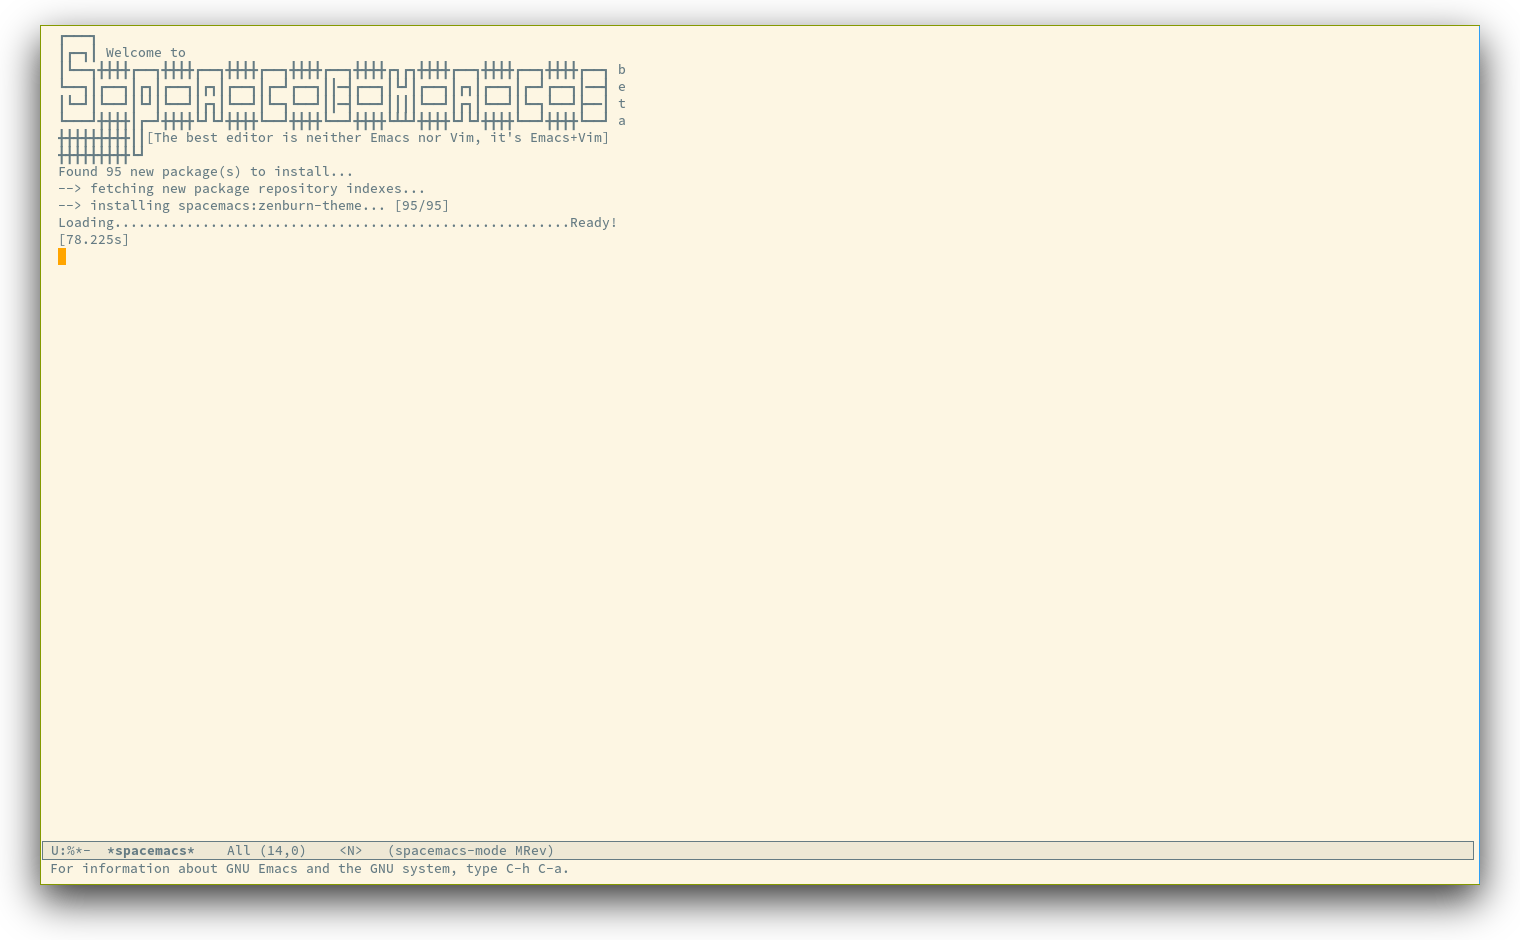 /TakeV/spacemacs/media/commit/d3cf6e42c3571364006ba59d1fbbb264611601b9/doc/img/spacemacs-startup.png